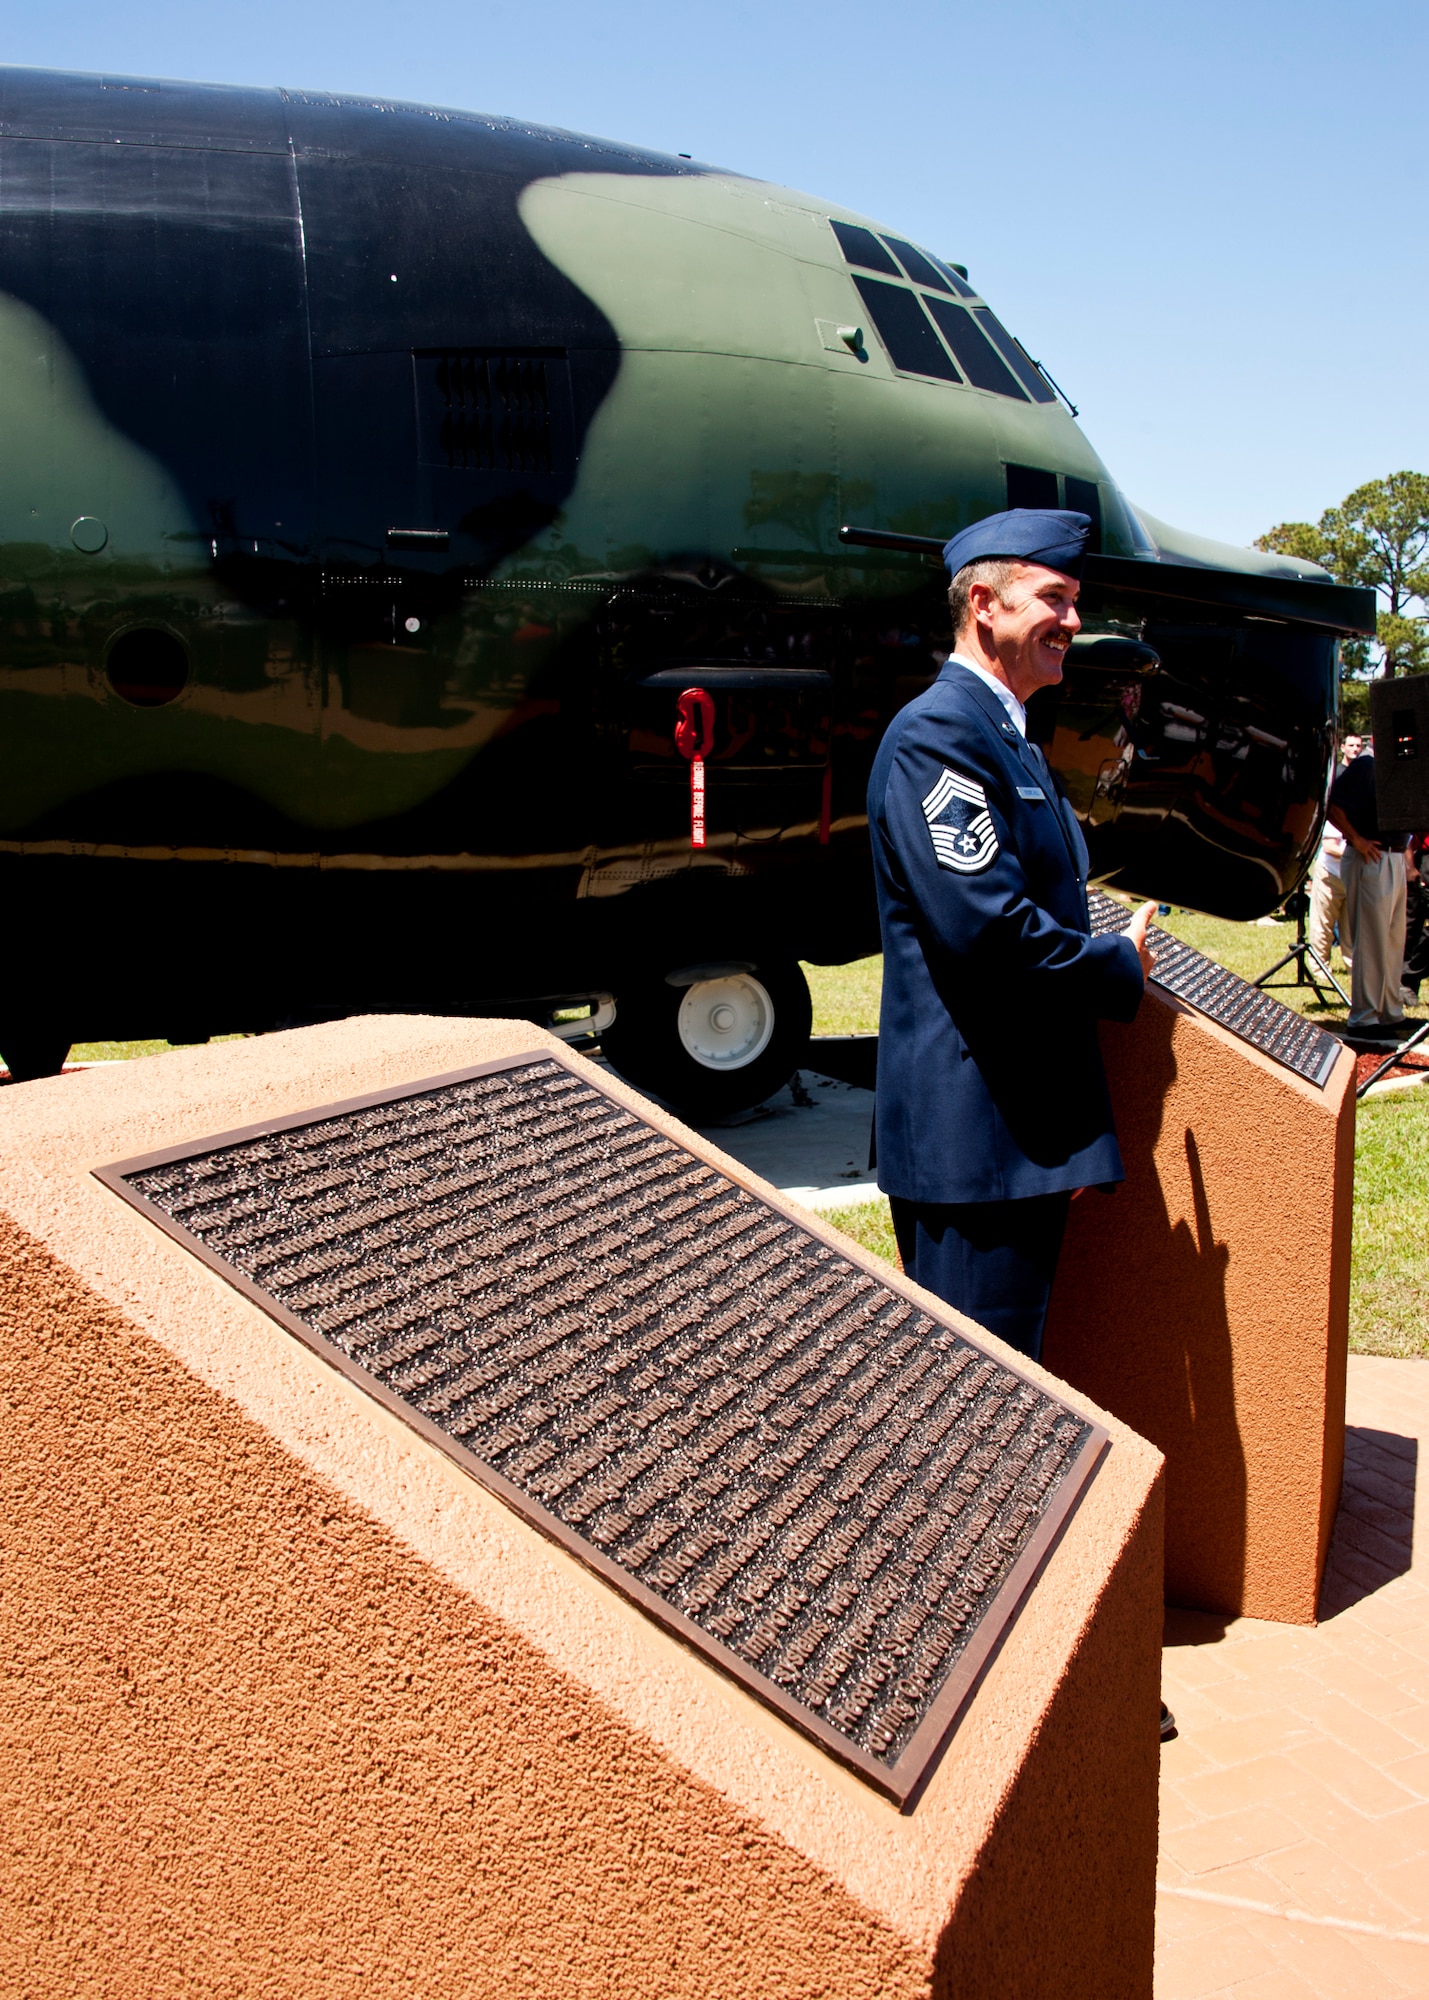 Chief Master Sgt. Dale Berryhill, 919th Operations Group, stands in front of the plaque and MC-130E Combat Talon I during the aircraft’s dedication at Hurlburt Field airpark May 6.  The Talon known as “Wild Thing” had a 46-year Air Force career and 22,336.5 flight hours.  (U.S. Air Force photo/Tech. Sgt. Samuel King Jr.)